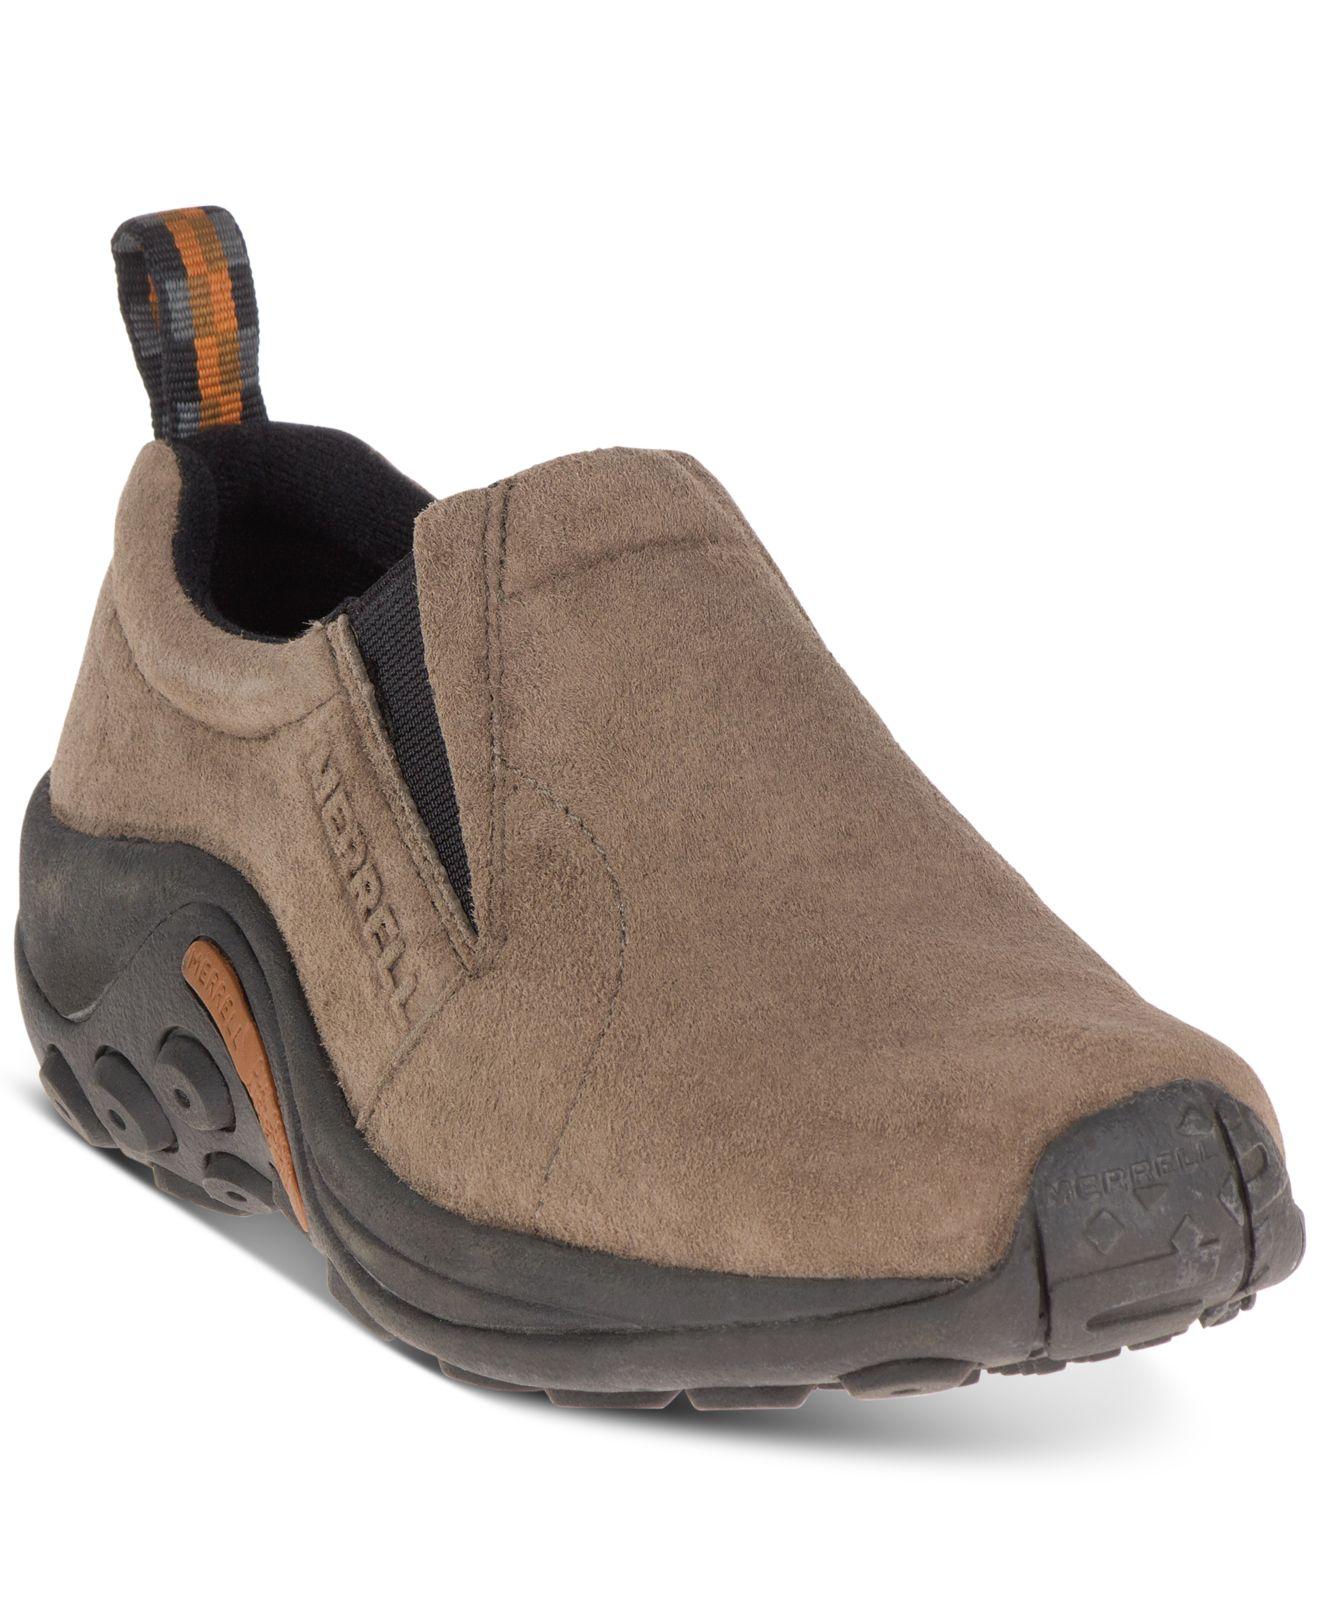 Merrell Suede Jungle Moc Slip-on Shoes in Grey (Gray) - Lyst